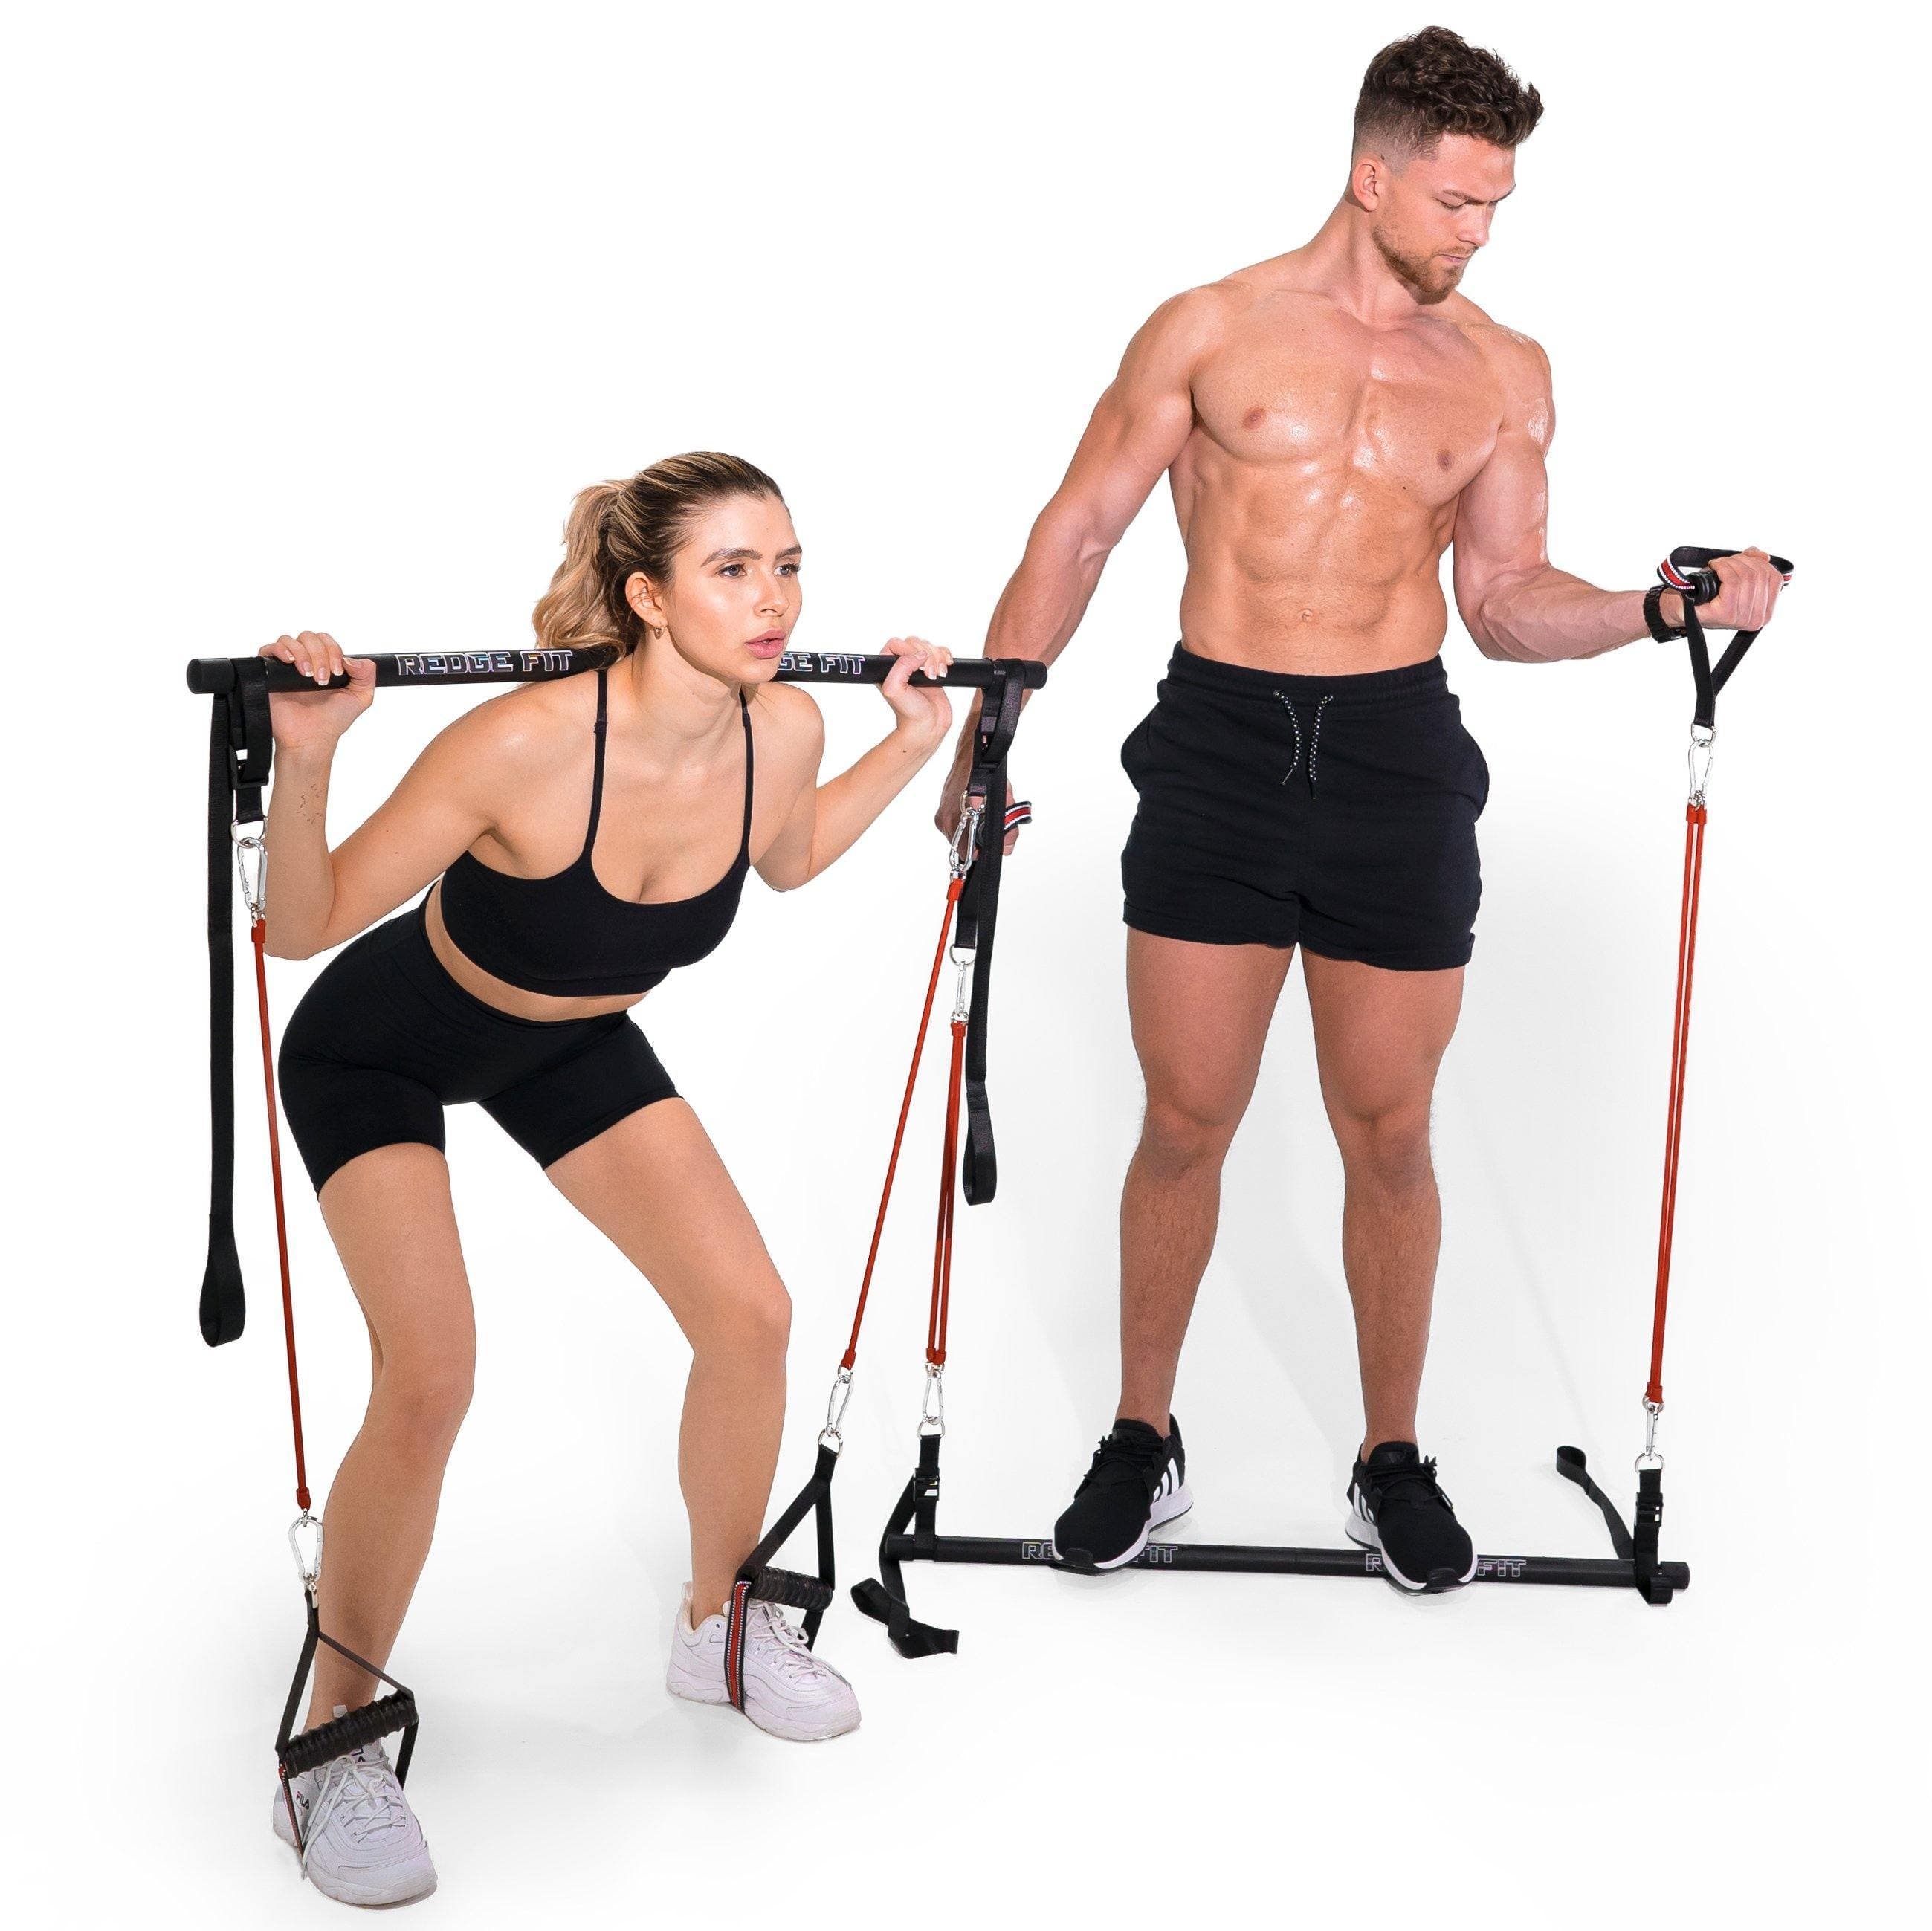 Man and Woman modeling the Redge Fit Portable Gym Machine Available at https://www.getredge.com/products/portable-gym-system